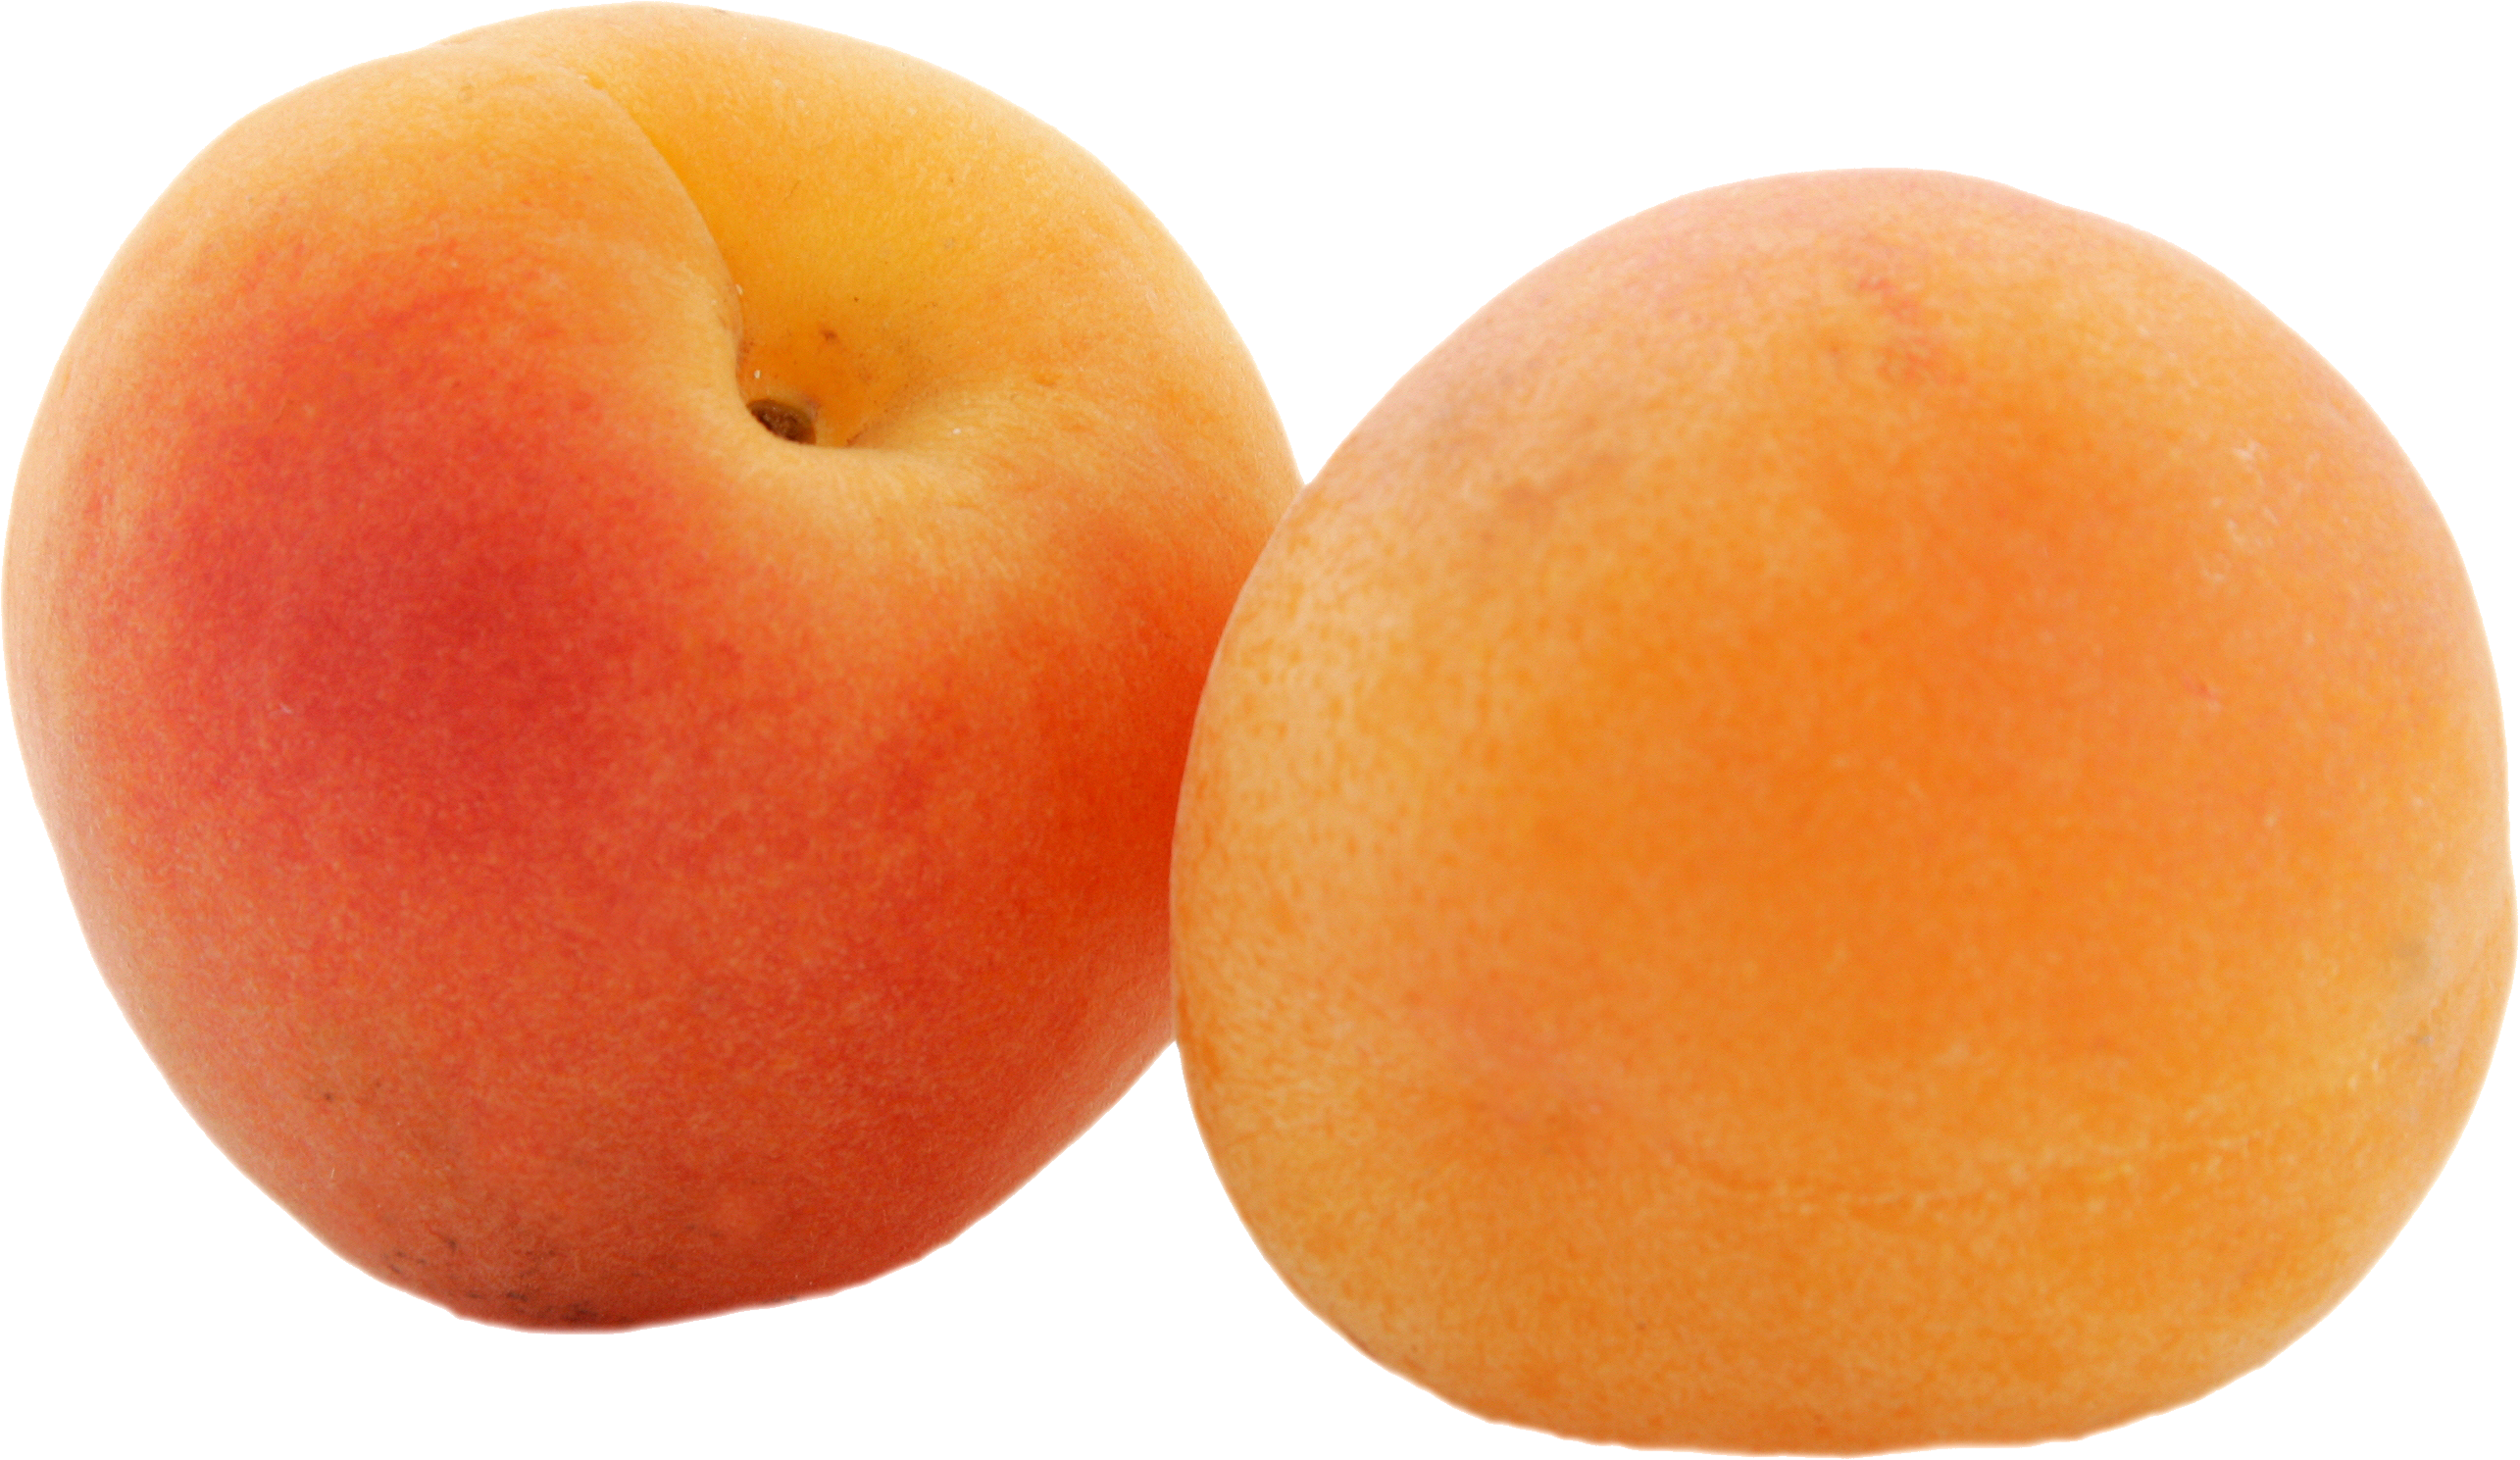 Apricot Fruit Picture PNG Image High Quality PNG Image